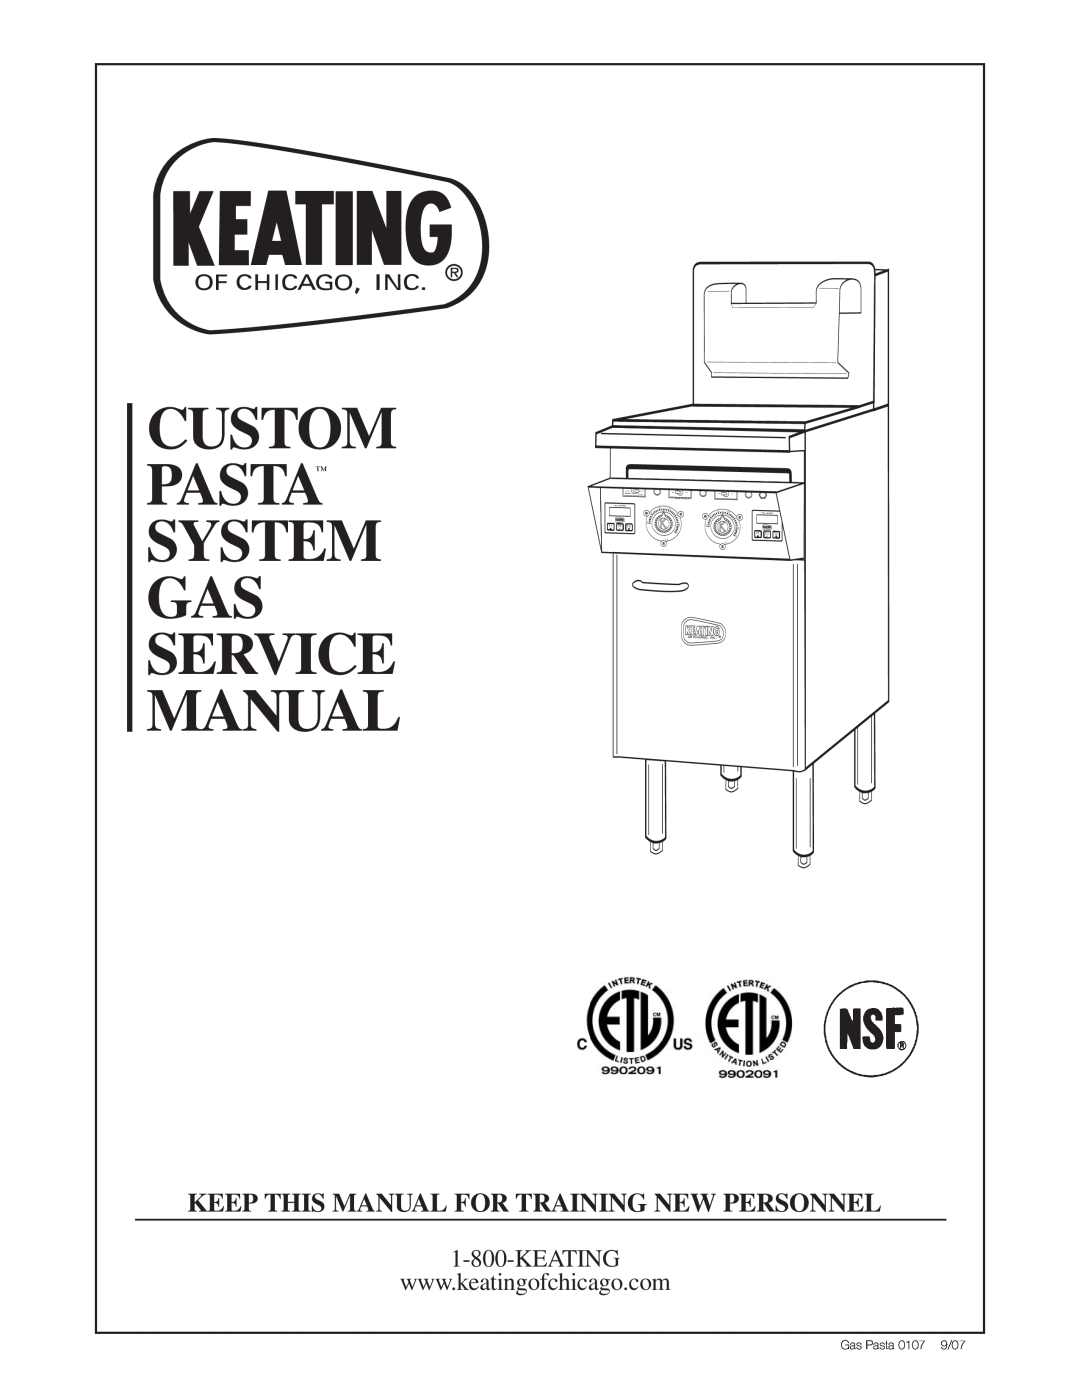 Keating Of Chicago service manual Custom Pasta, Keep This Manual For Training New Personnel, Gas Pasta 0107 9/07 